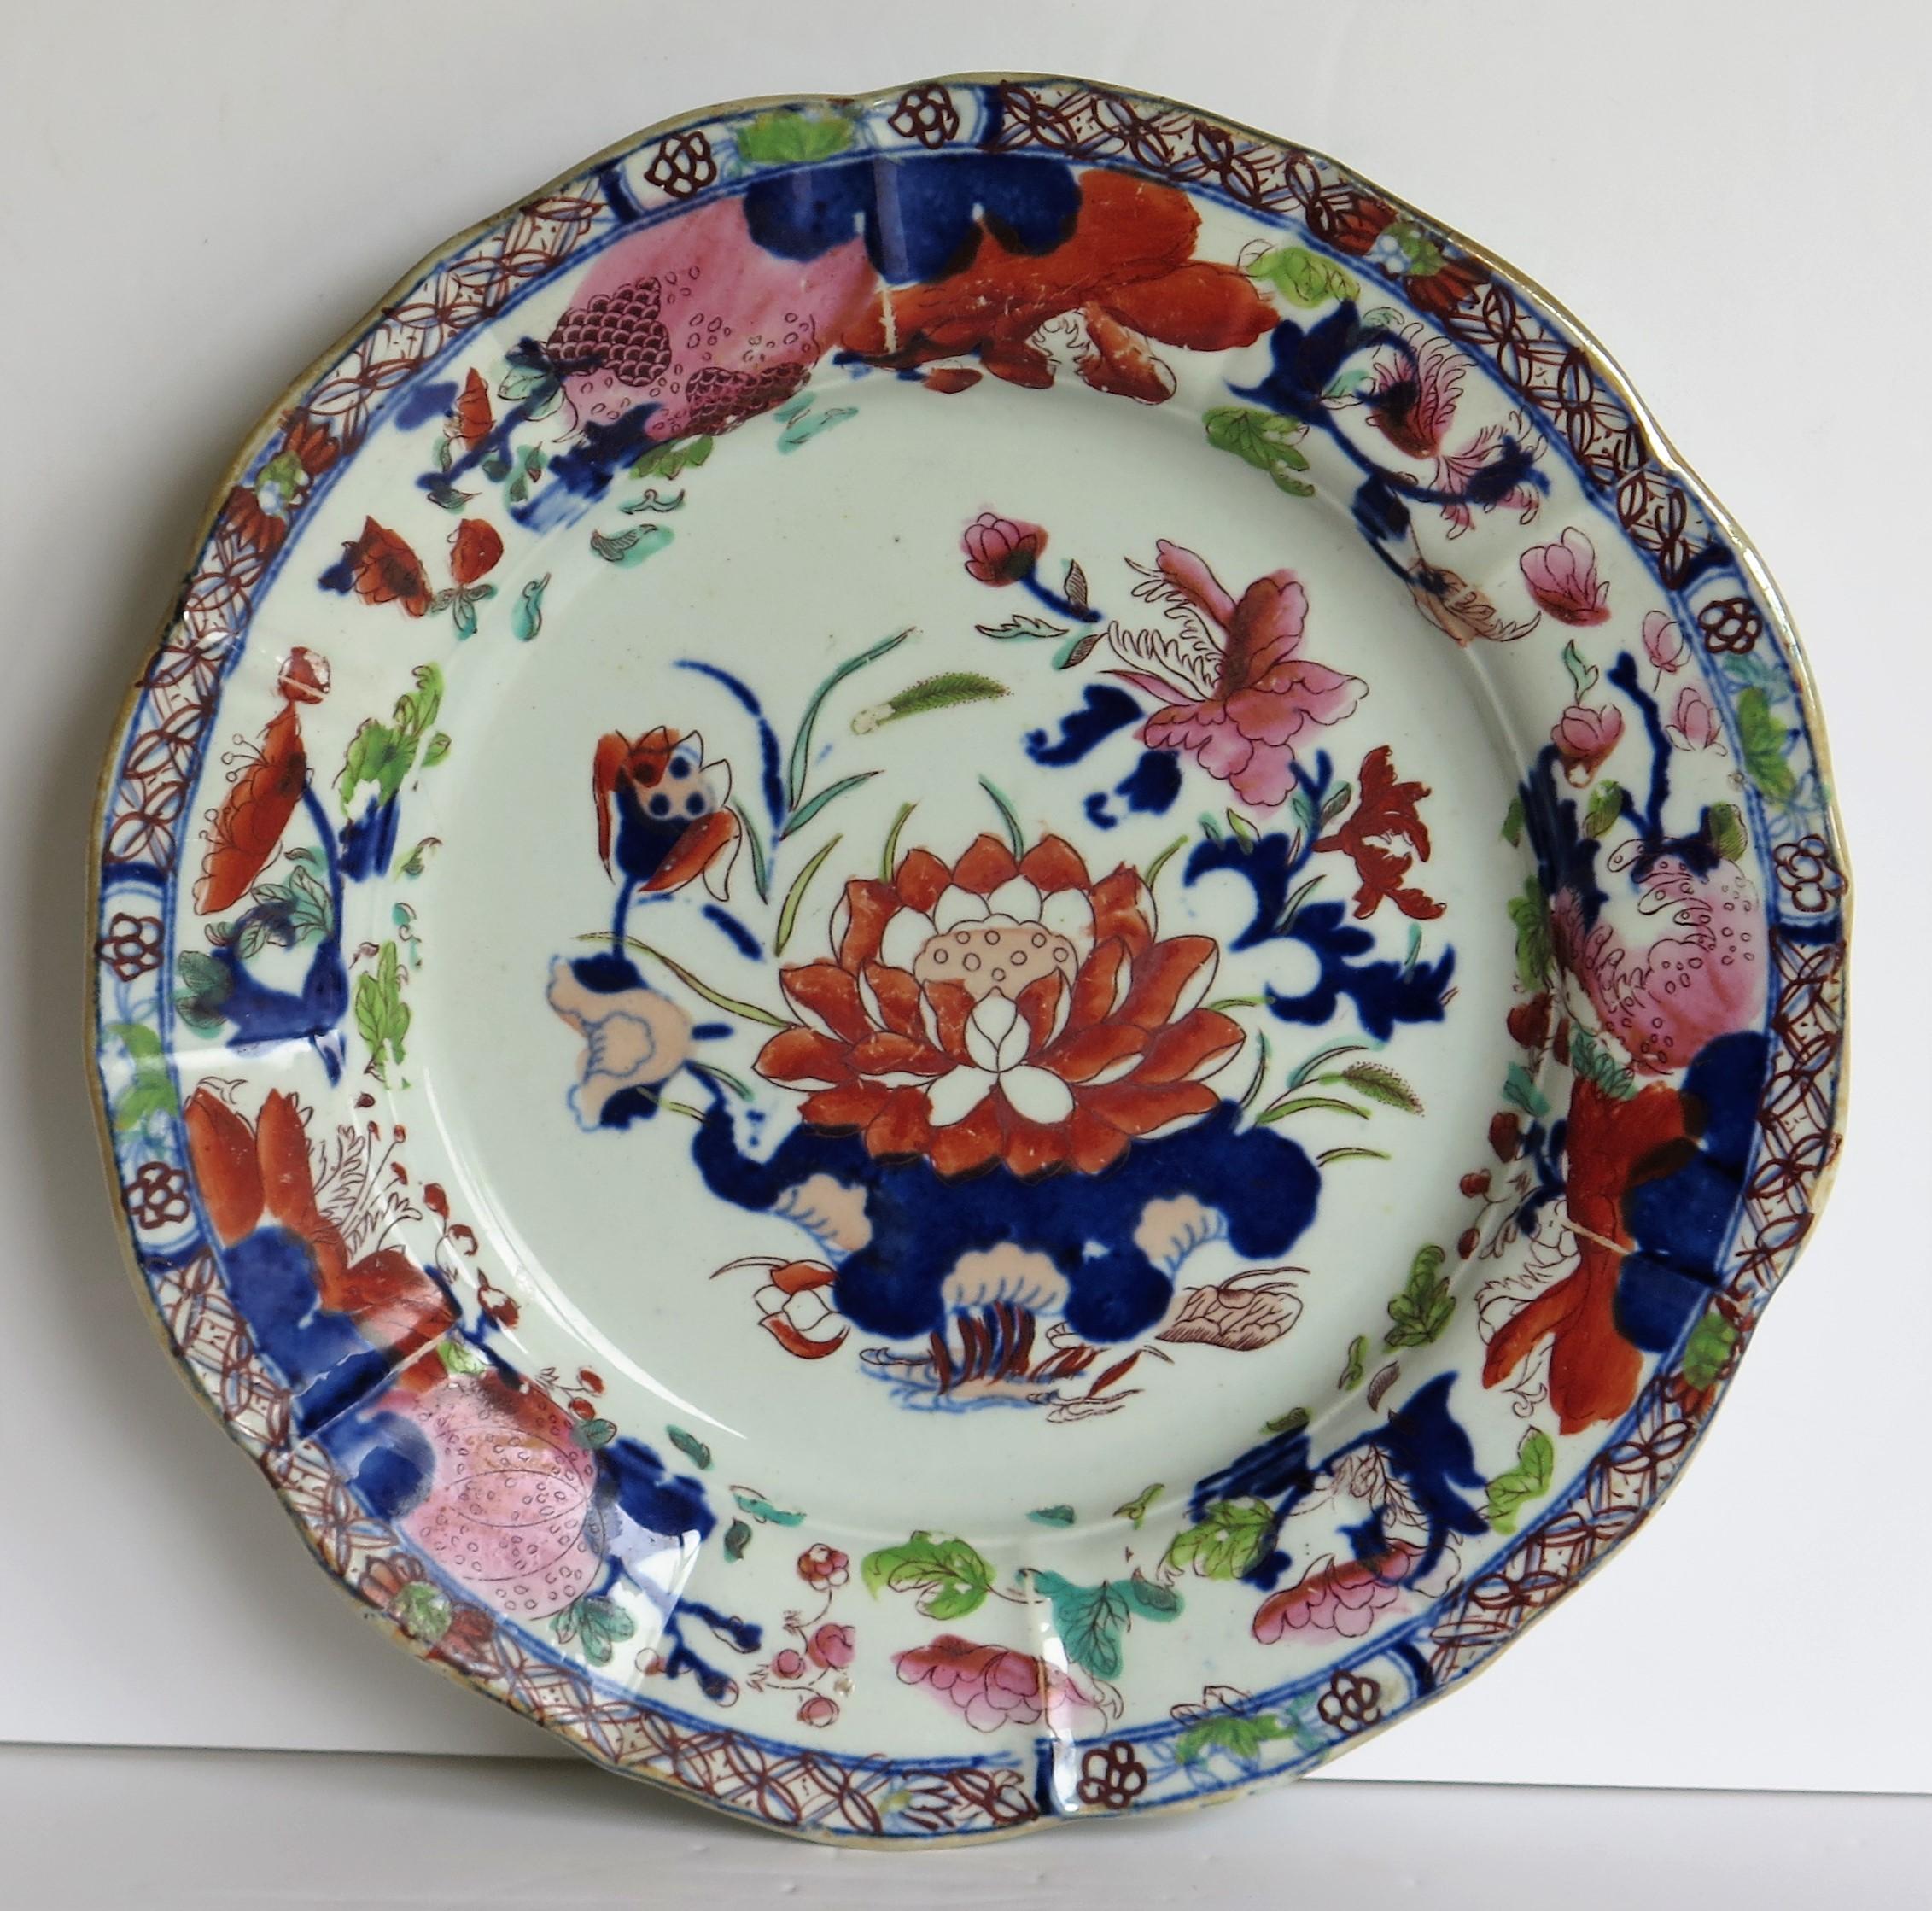 This is a very good early Mason's Ironstone pottery deep plate or dish in the very decorative Water Lily pattern, produced by the Mason's factory at Lane Delph, Staffordshire, England, circa 1813-1820.

The plate is circular with radial ribs and a